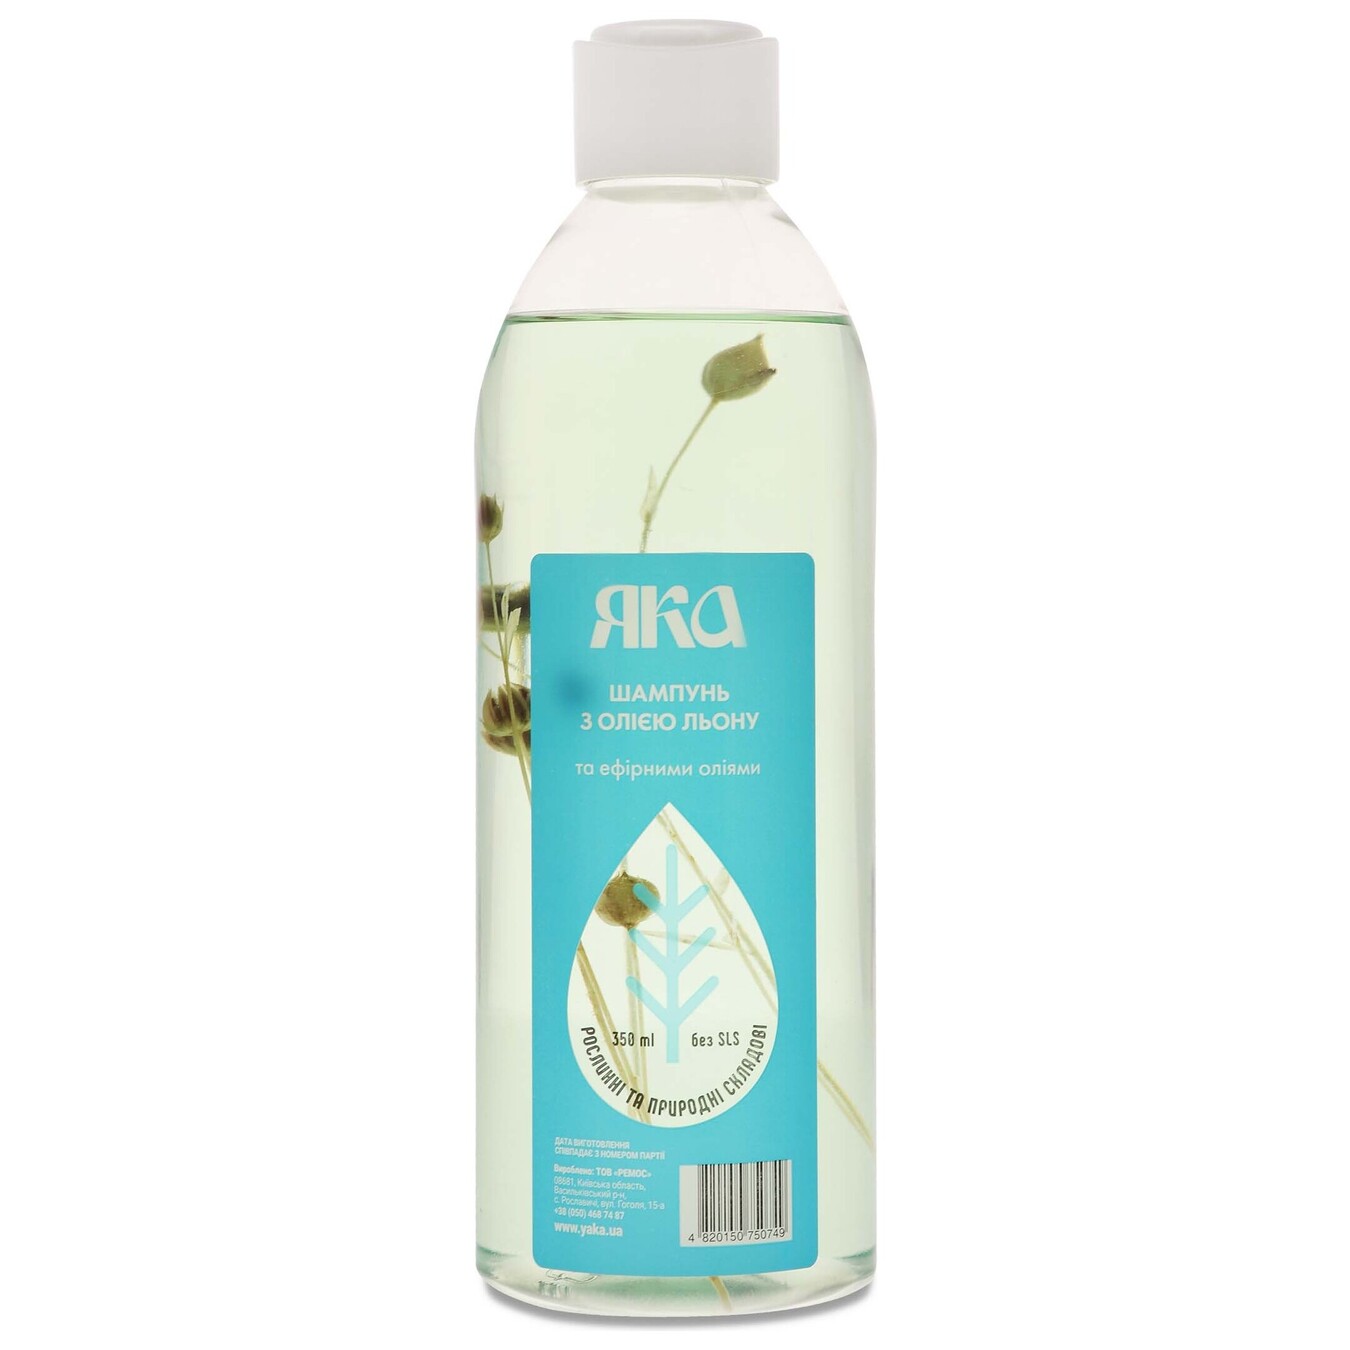 YAKA shampoo for strengthening hair with linseed oil and essential oils 350ml